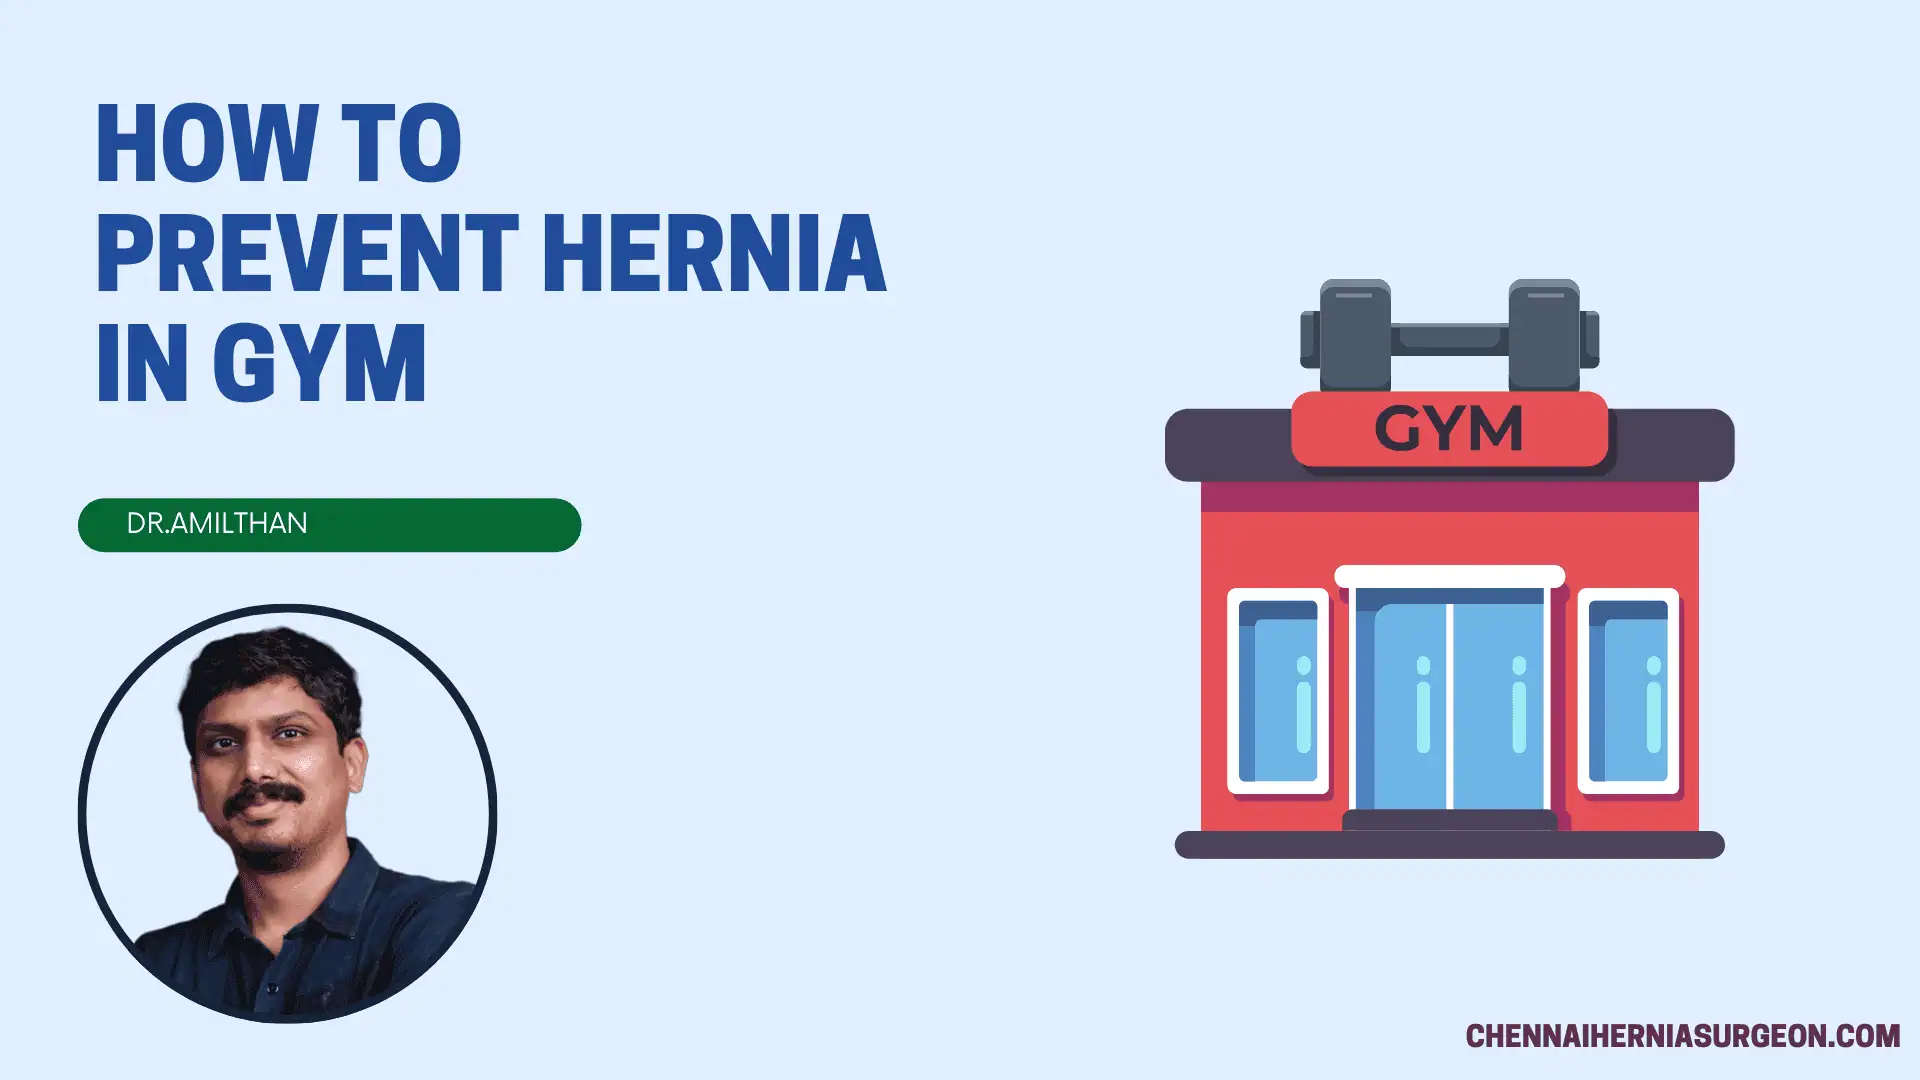 How To Prevent Hernia in Gym